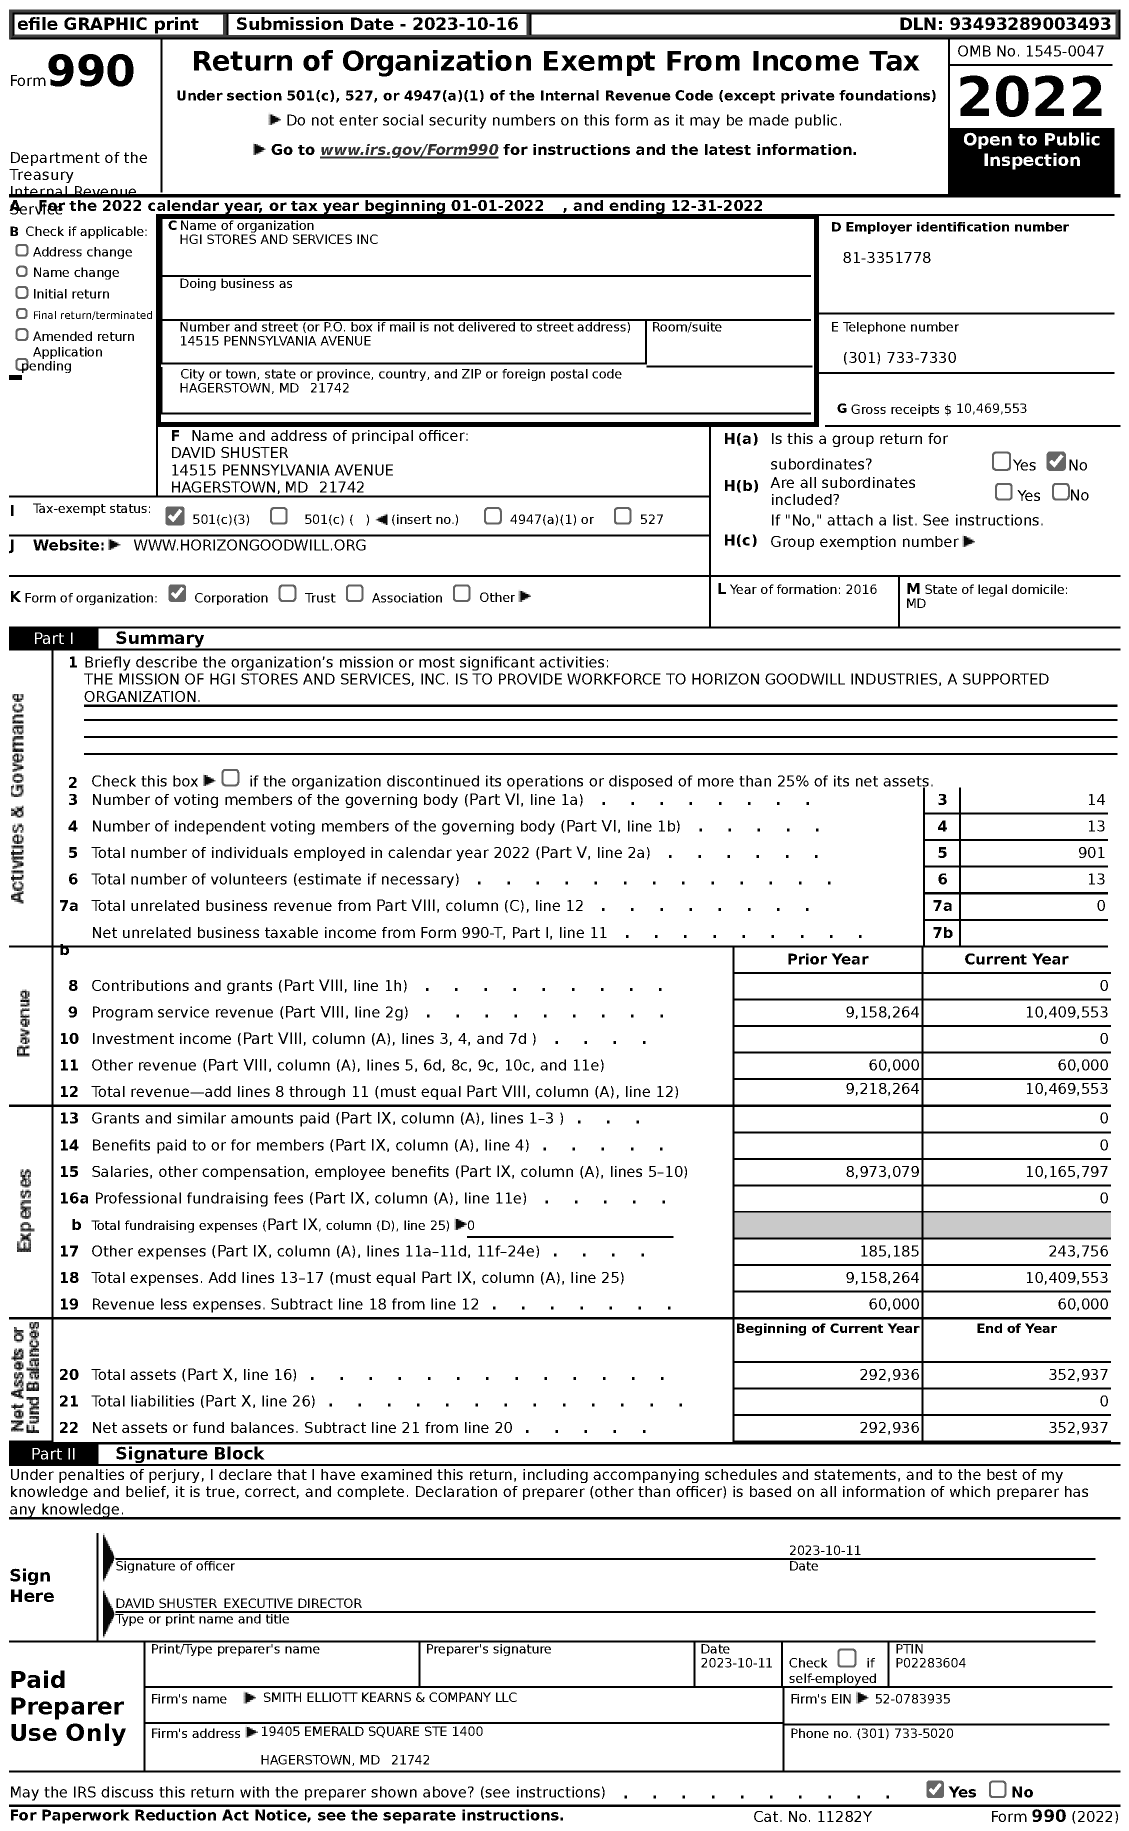 Image of first page of 2022 Form 990 for Hgi Stores and Services